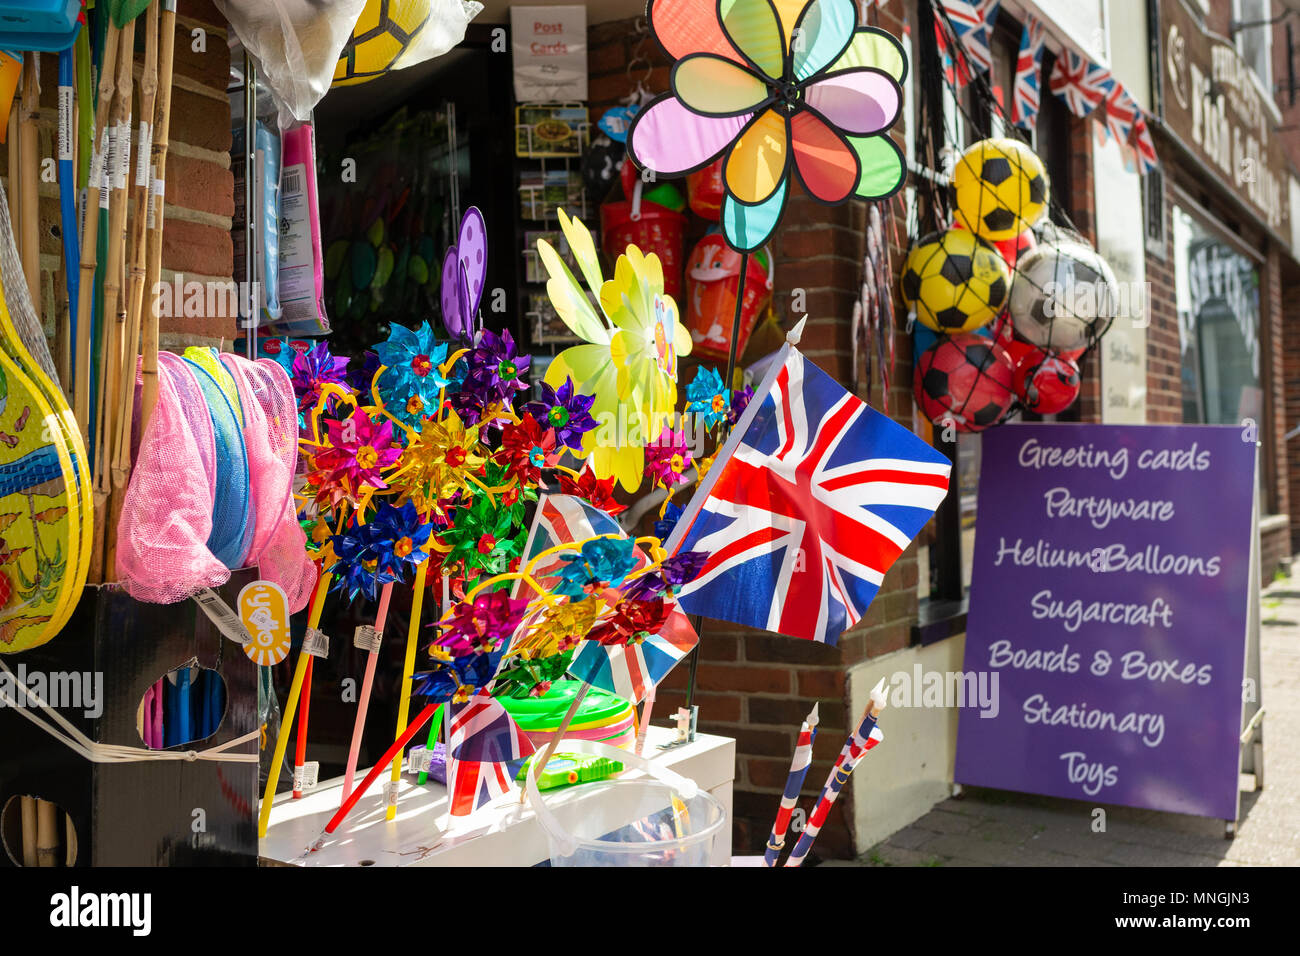 A British Union Jack flag sits among other outdoor toys and games items outside a high street gift and craft shop. Stock Photo